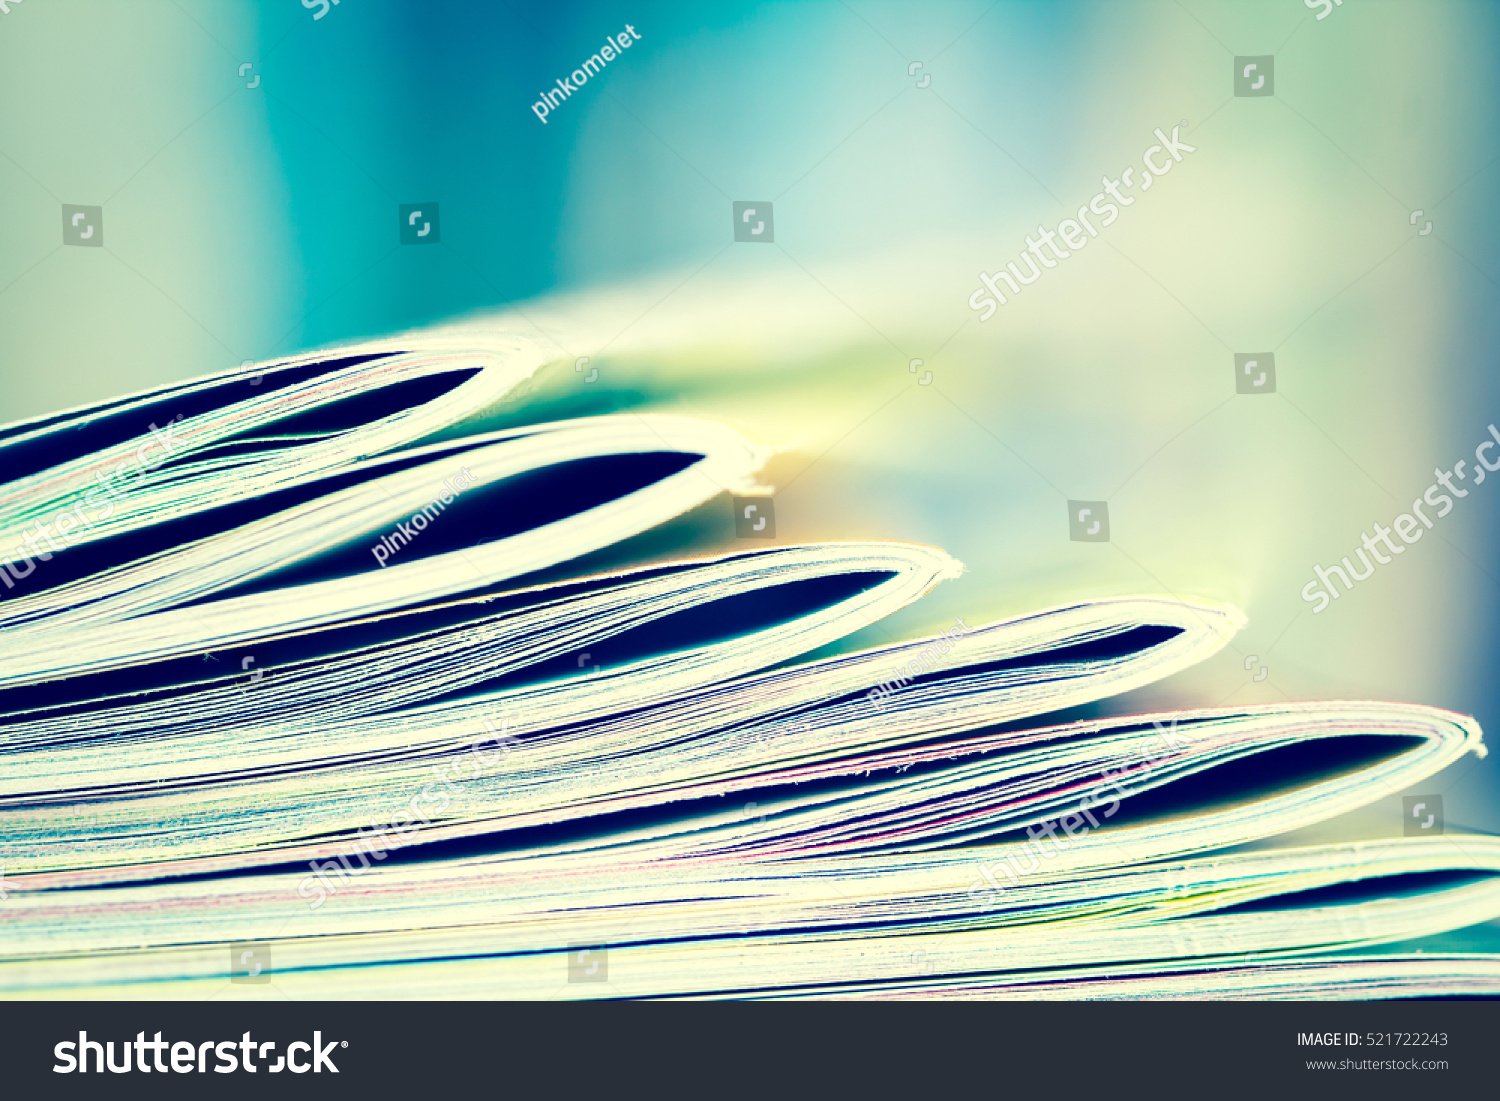 Close up edge of colorful magazine stacking with  blurry bookshelf background for publication and publishing concept , extremely shallow DOF with vintage retro color tone #521722243